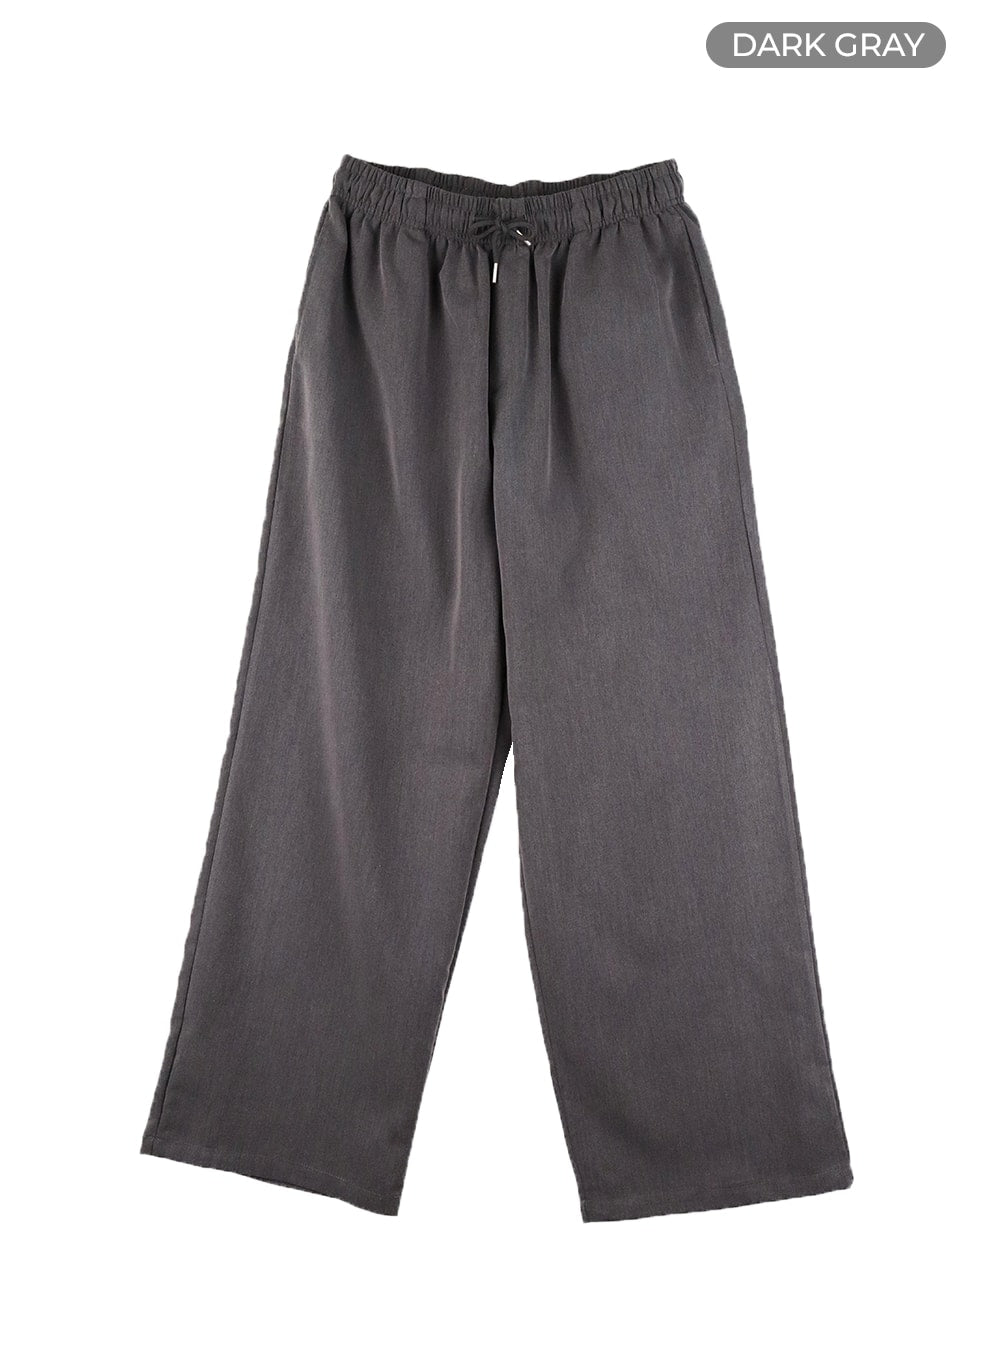 mens-banded-wide-leg-trousers-ia401 / Dark gray